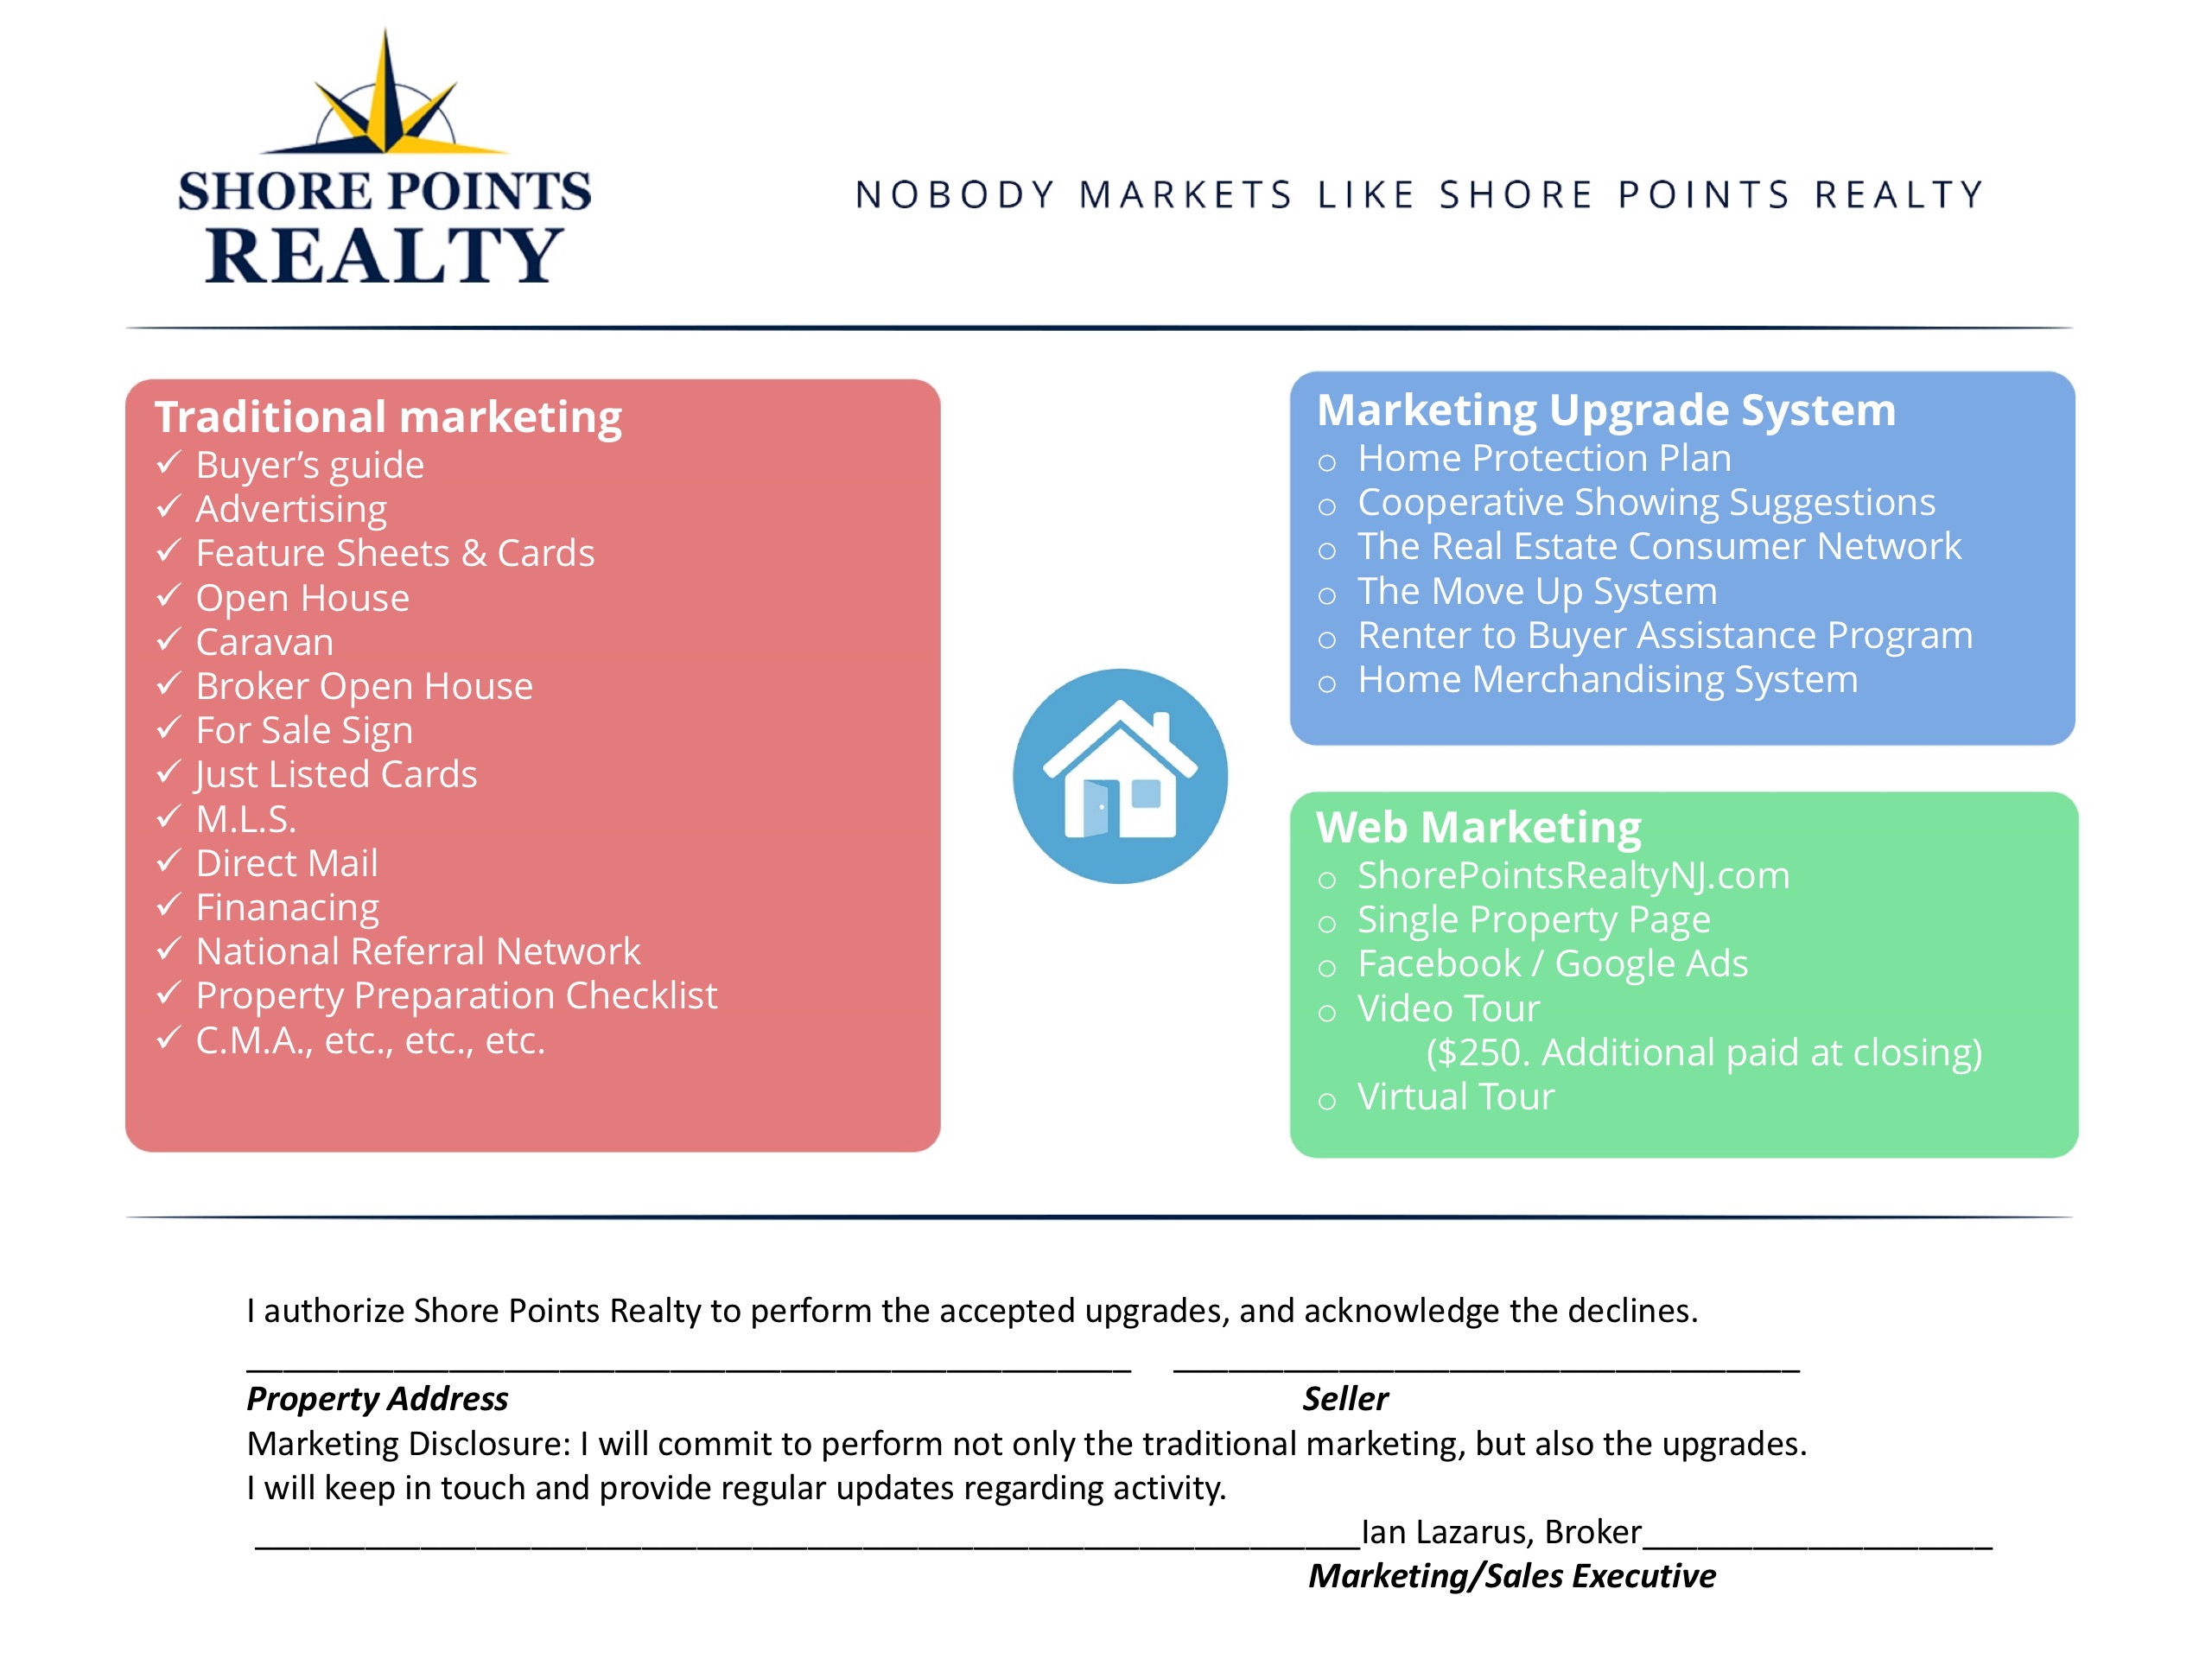 Shore Points Realty Marketing Upgrade System